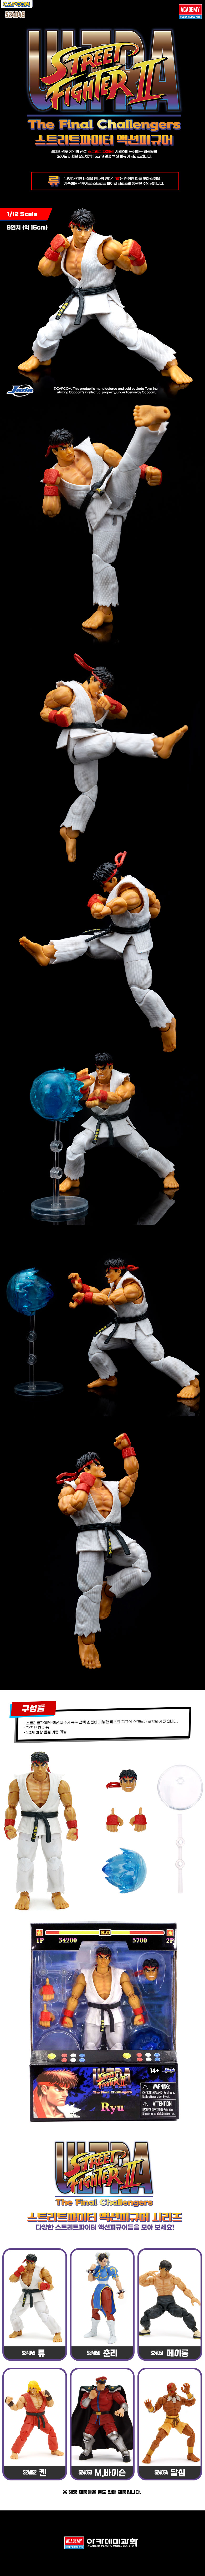 05_toy/01_animation_toy/hollywood_rides/s24049_streetfighter-ryu2.jpg